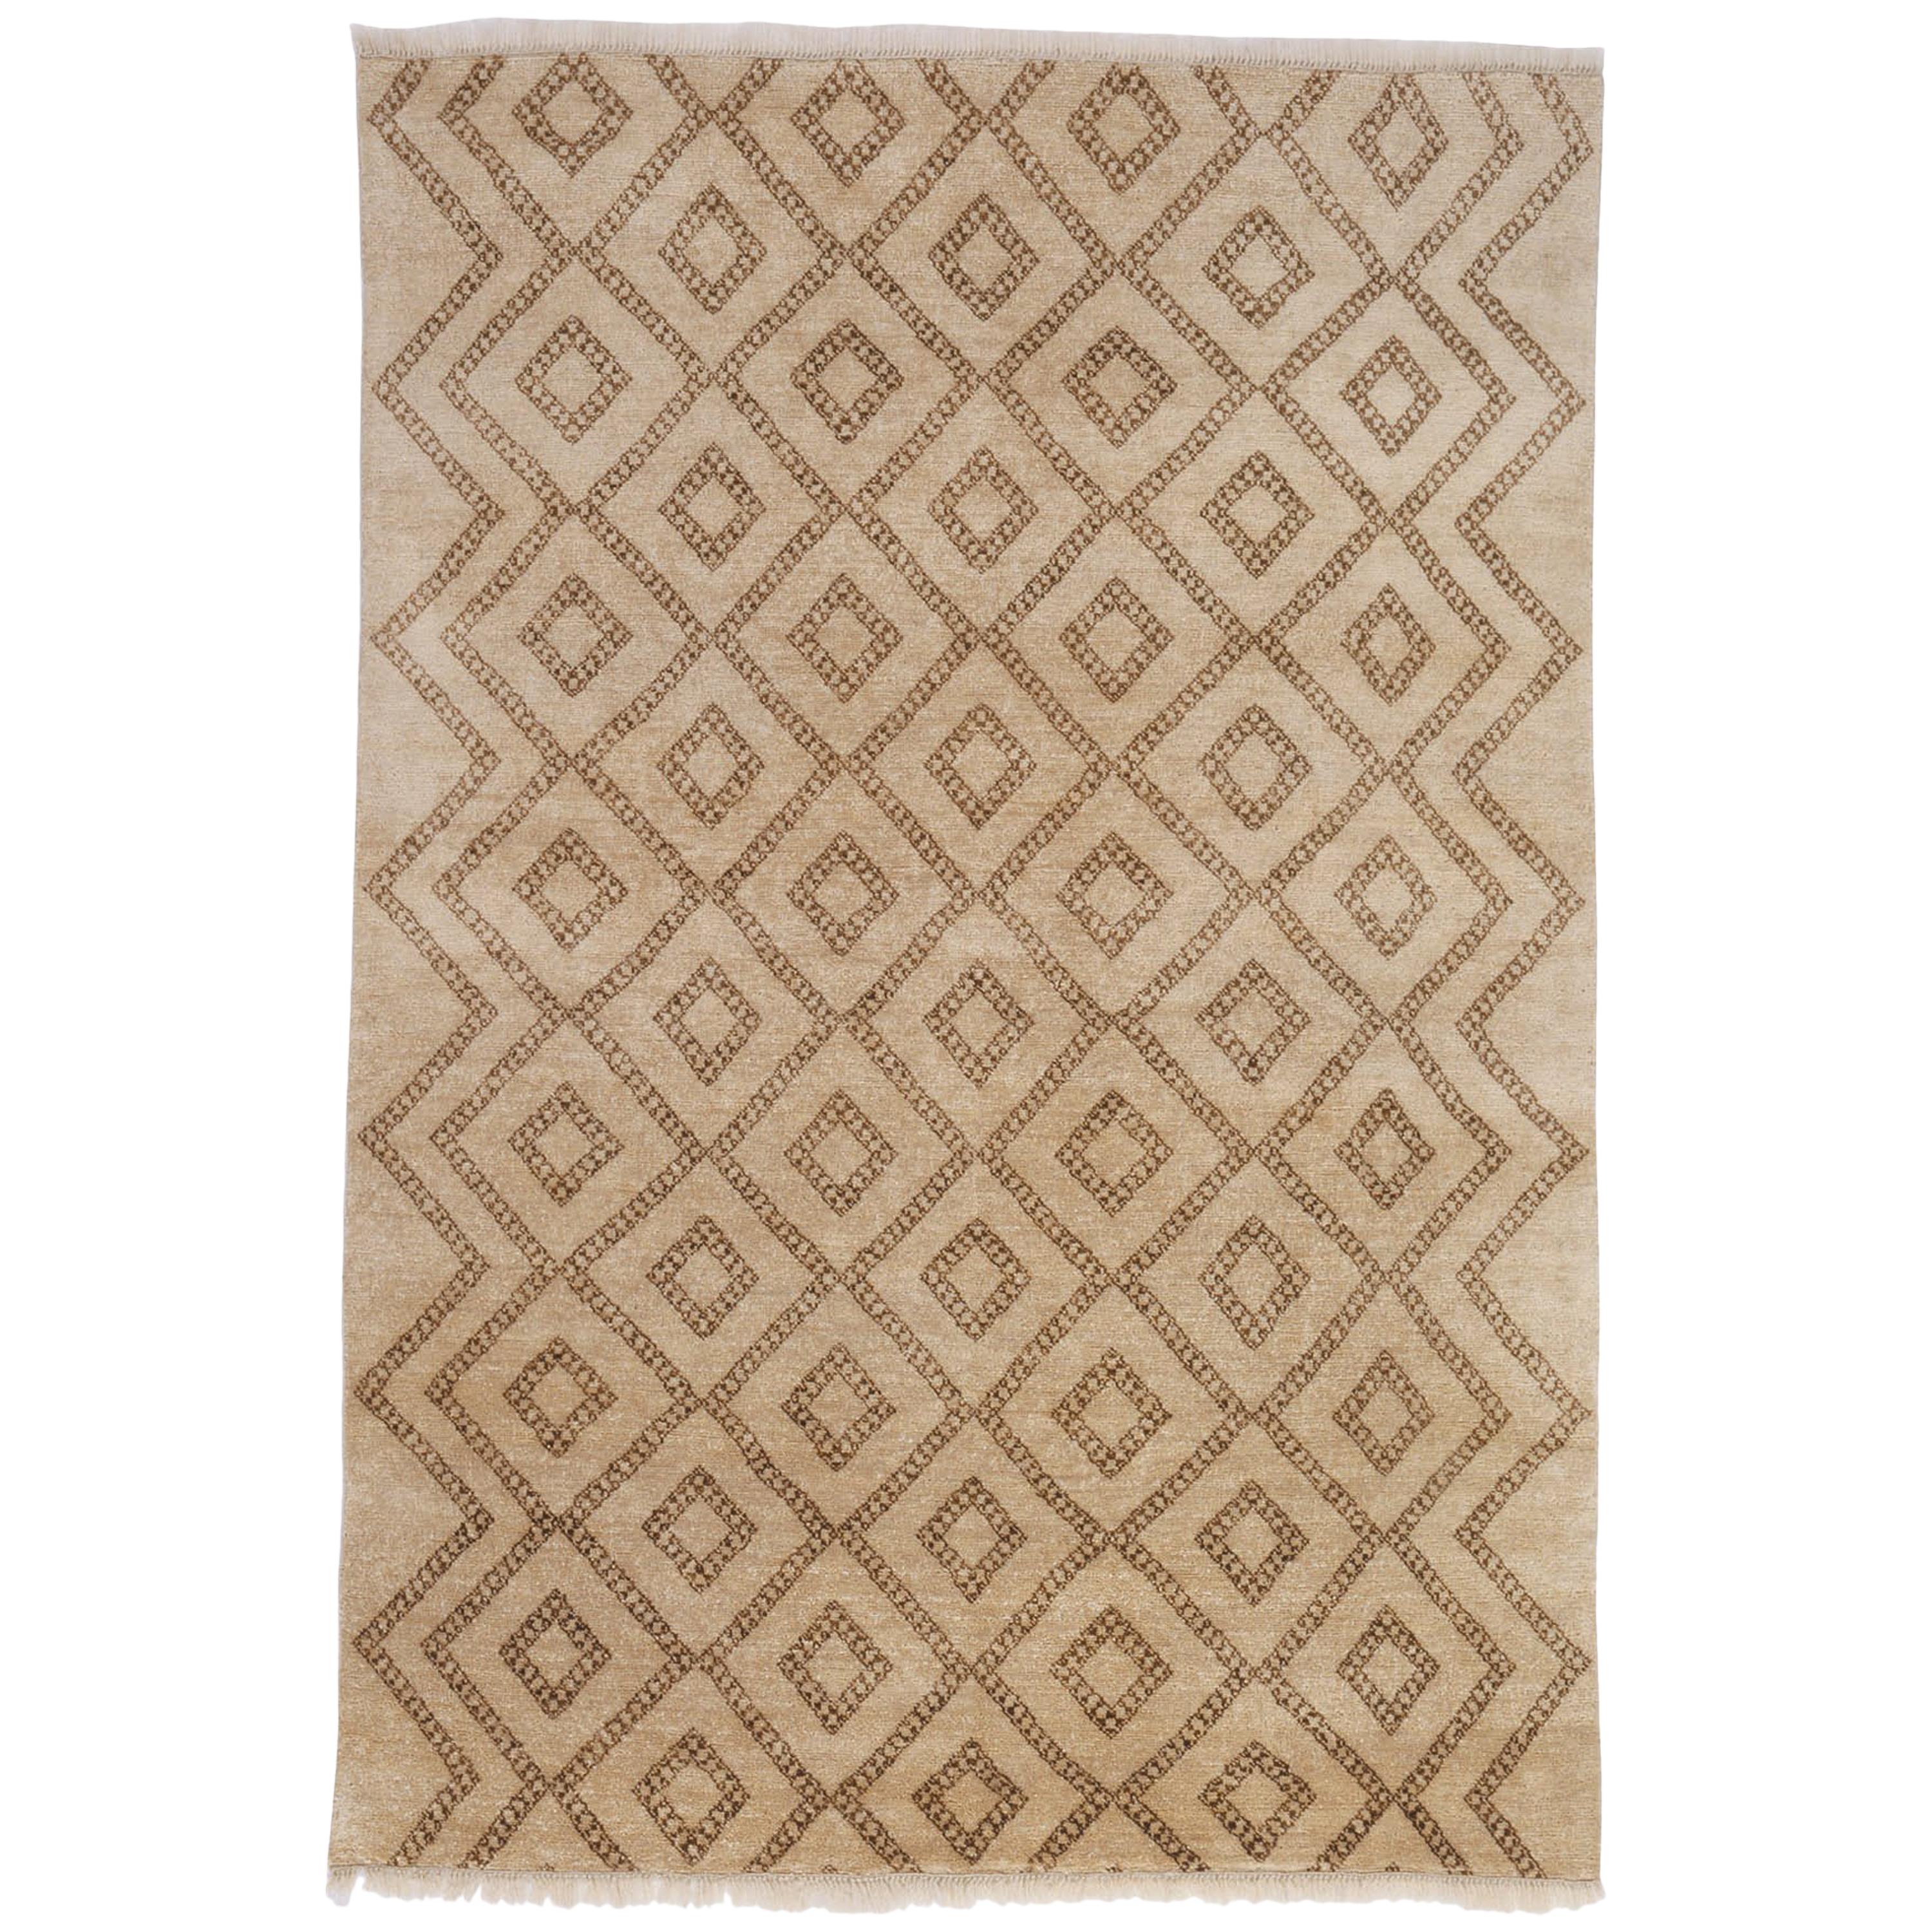 Berber Hand-Knotted Area Rug in Wool by The Rug Company